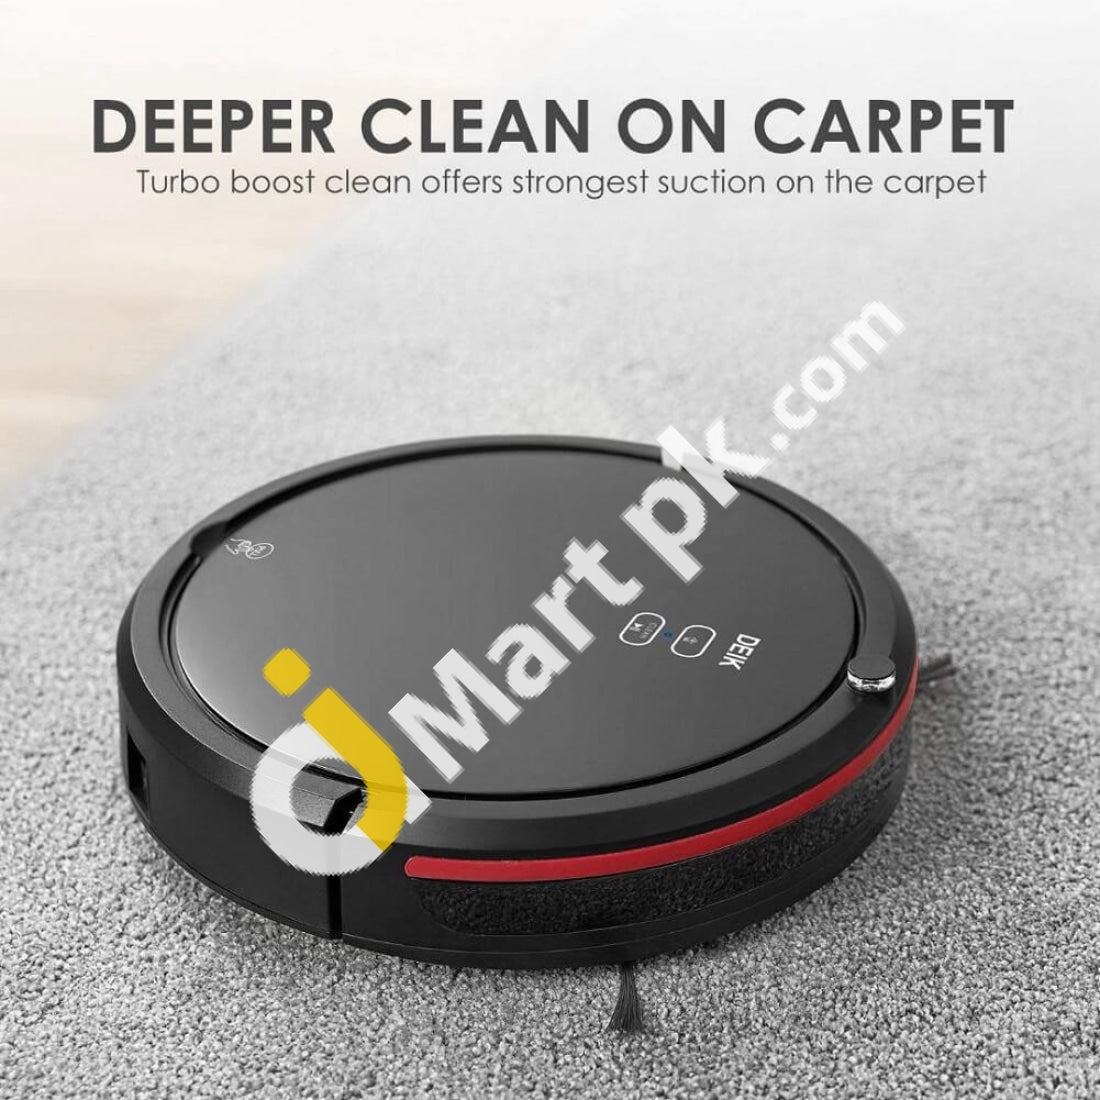 Robotic Vacuum Cleaner Deik Self-Charging With Hepa Filter For Hard Surface Floors & Thin Carpets -